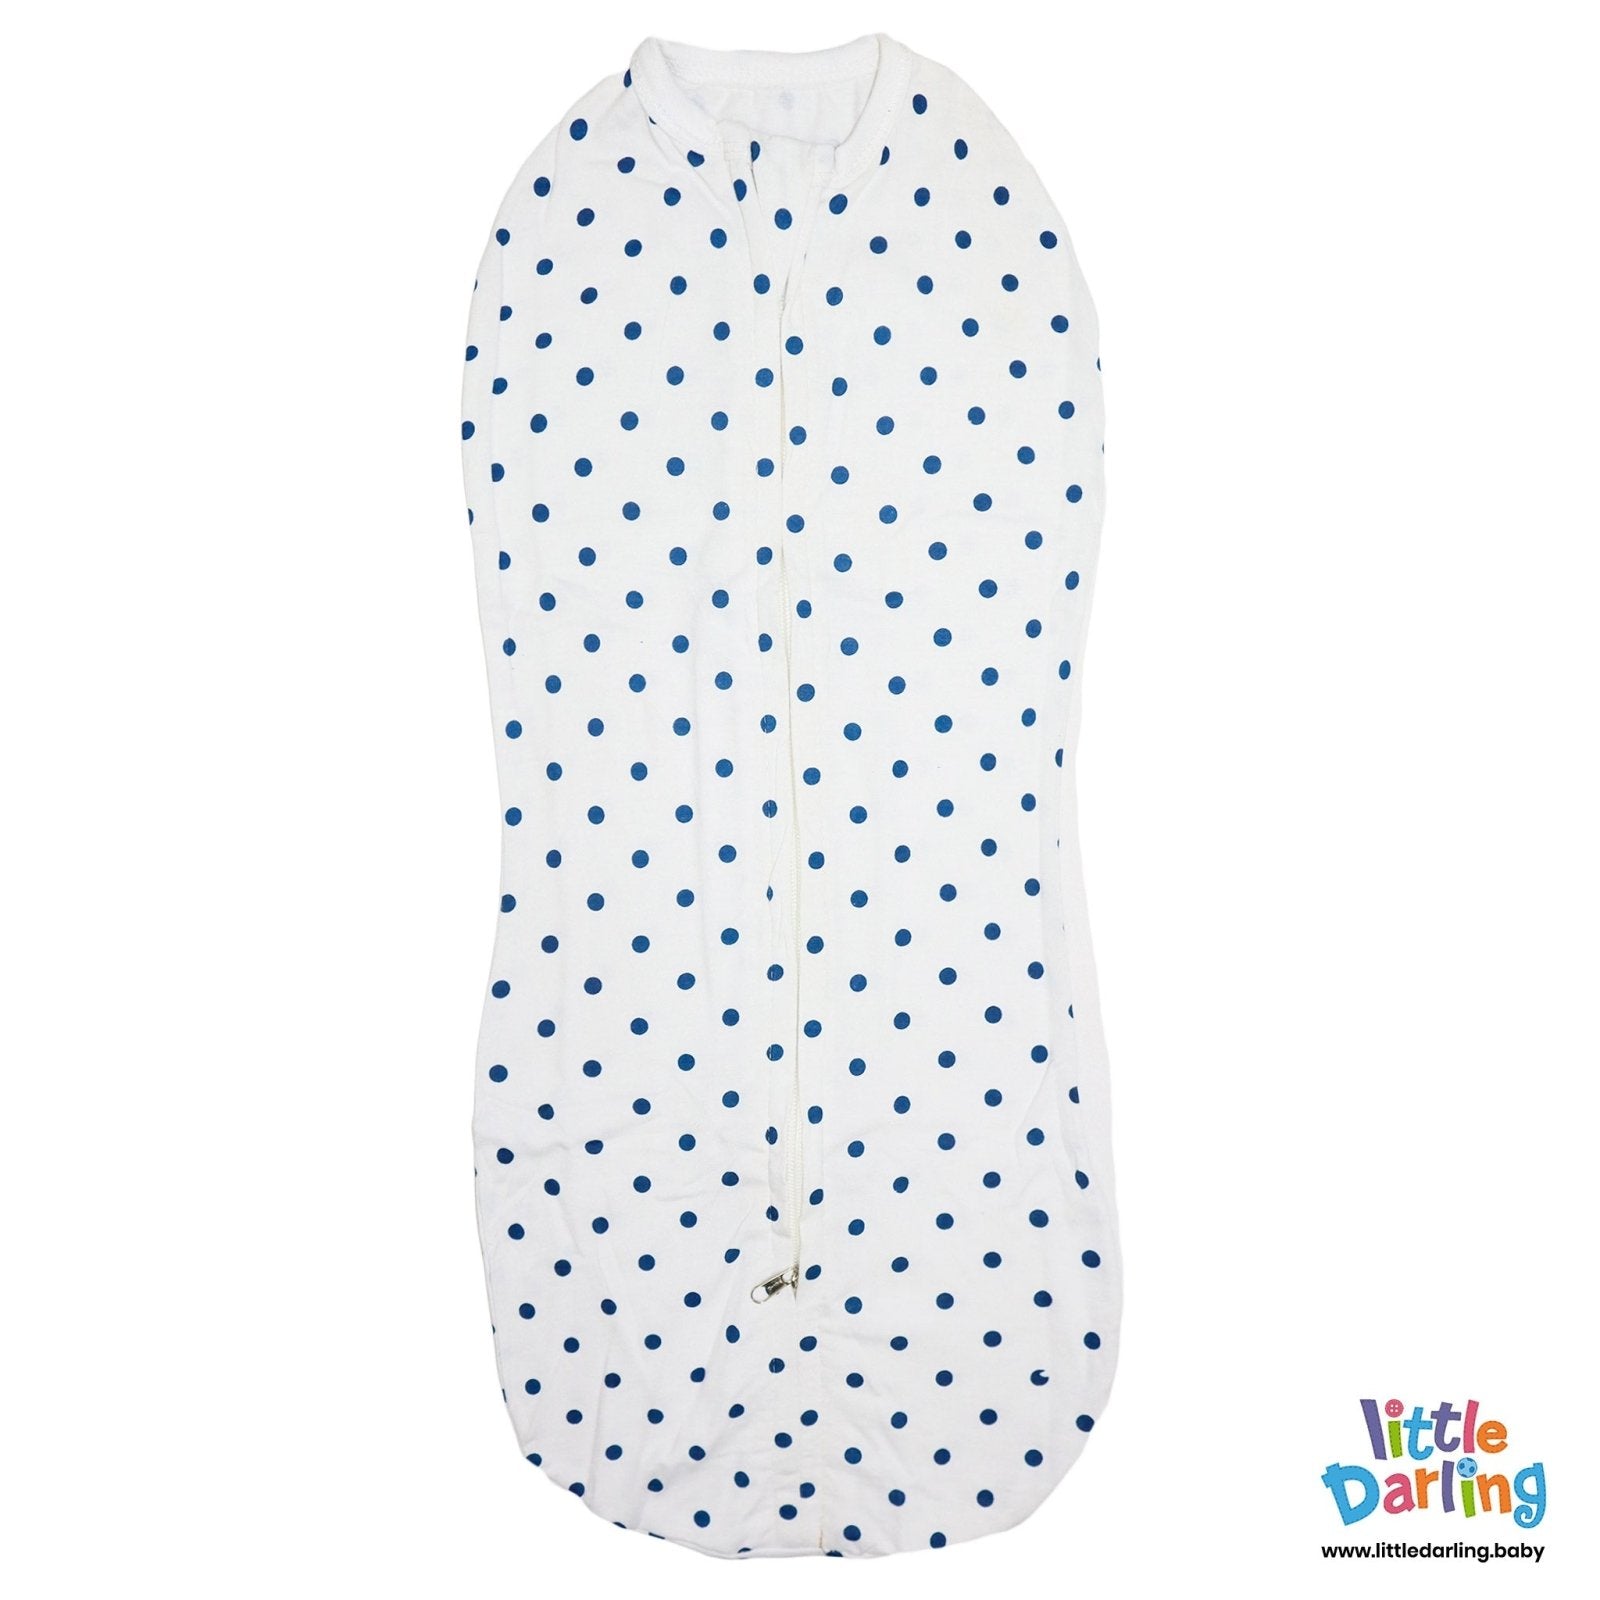 Baby Swaddle Pack of 2 Dot Print by Little Darling